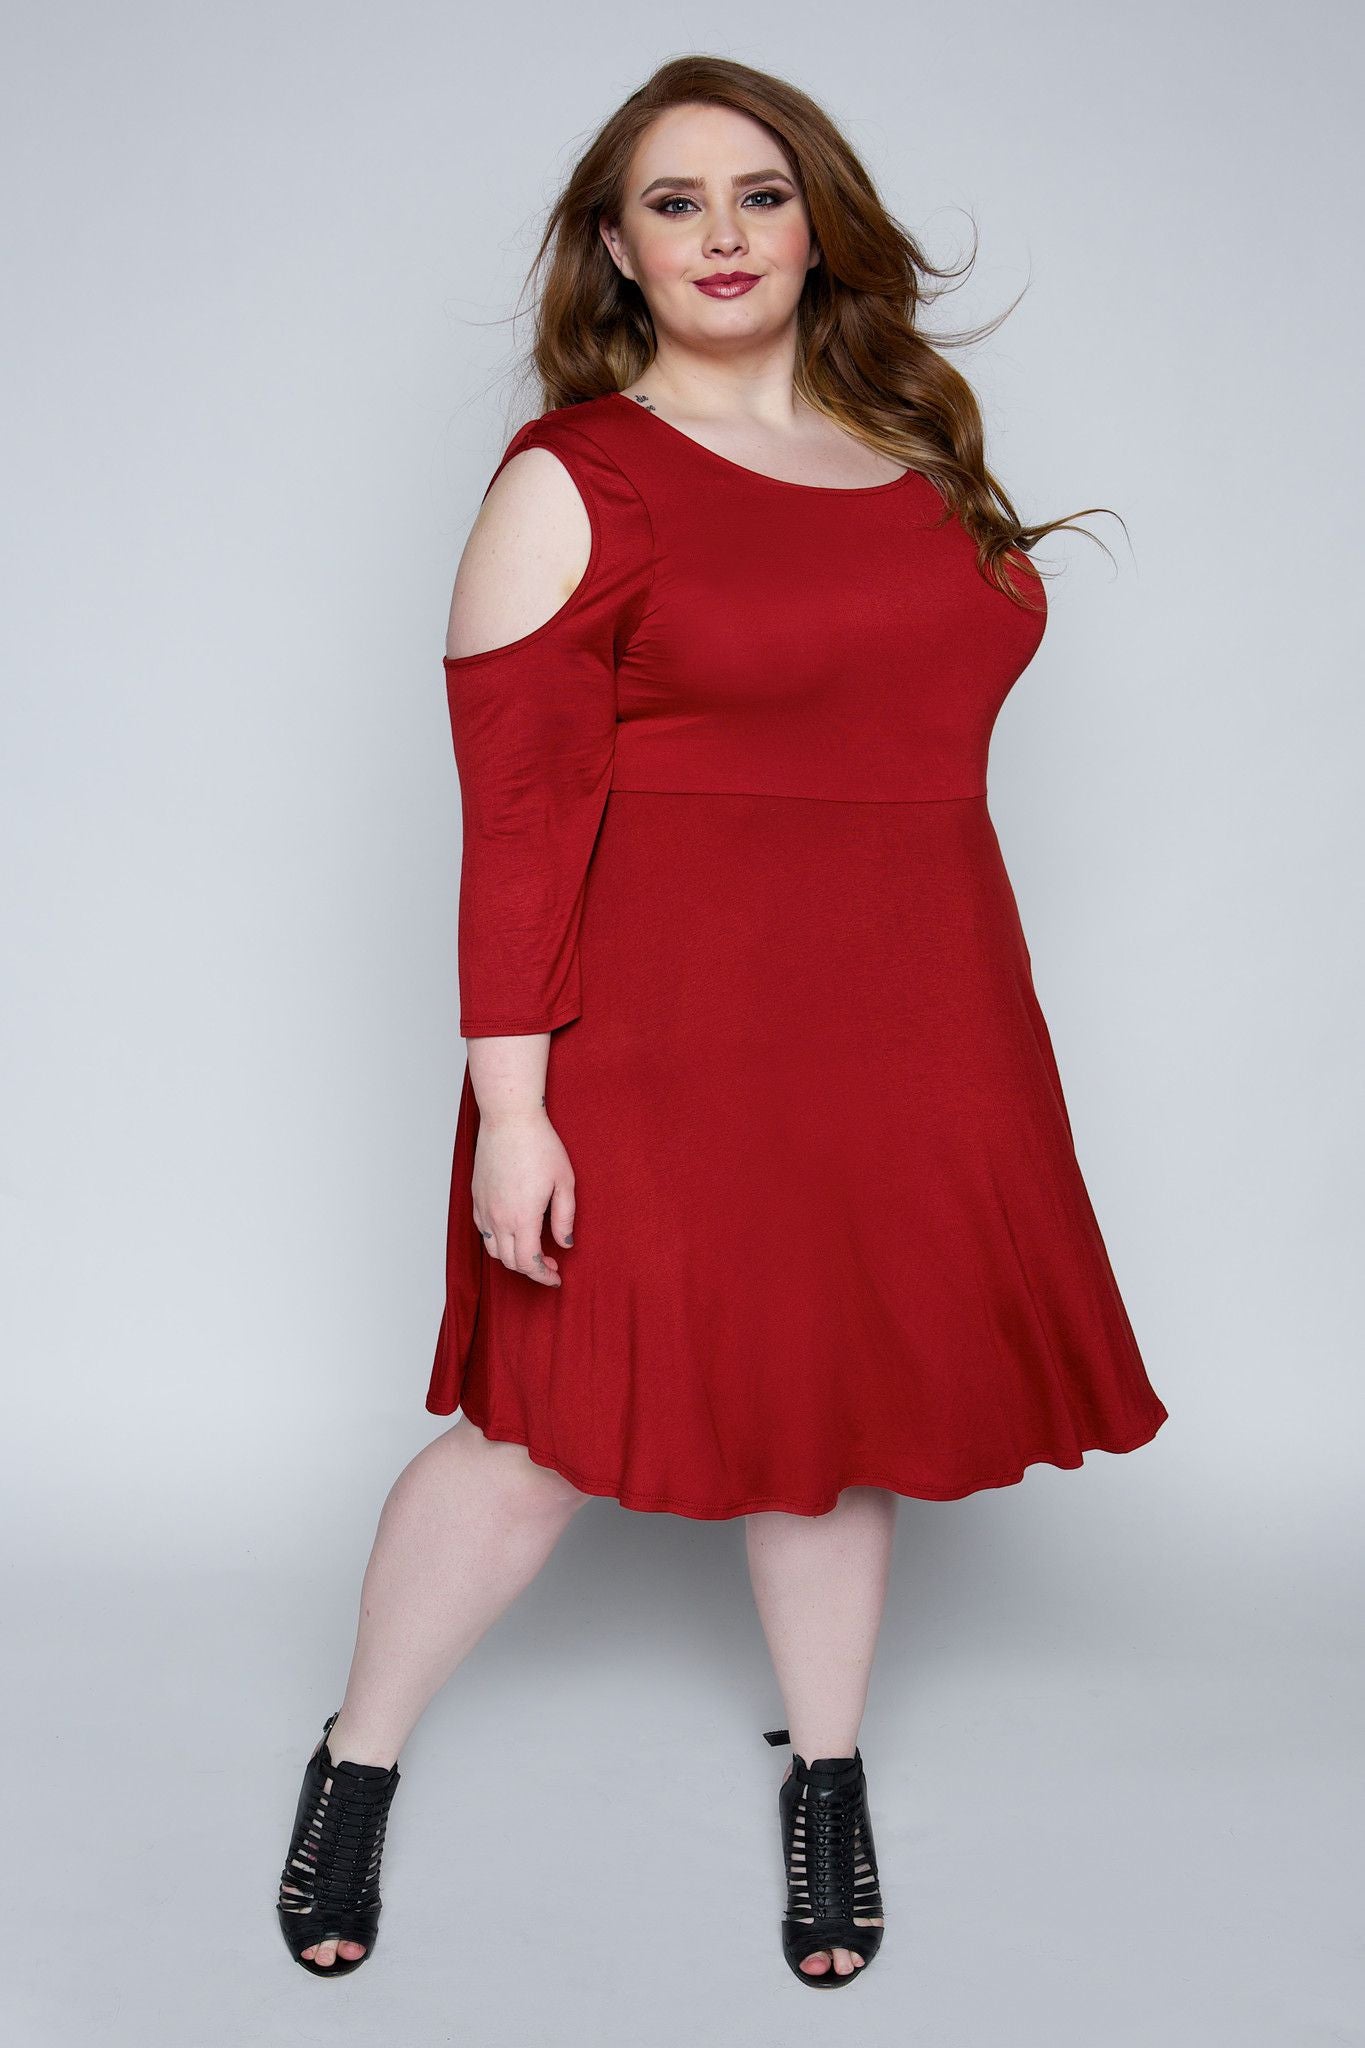 Online Shopping For Plus Size Womens Clothing | Beauty Clothes